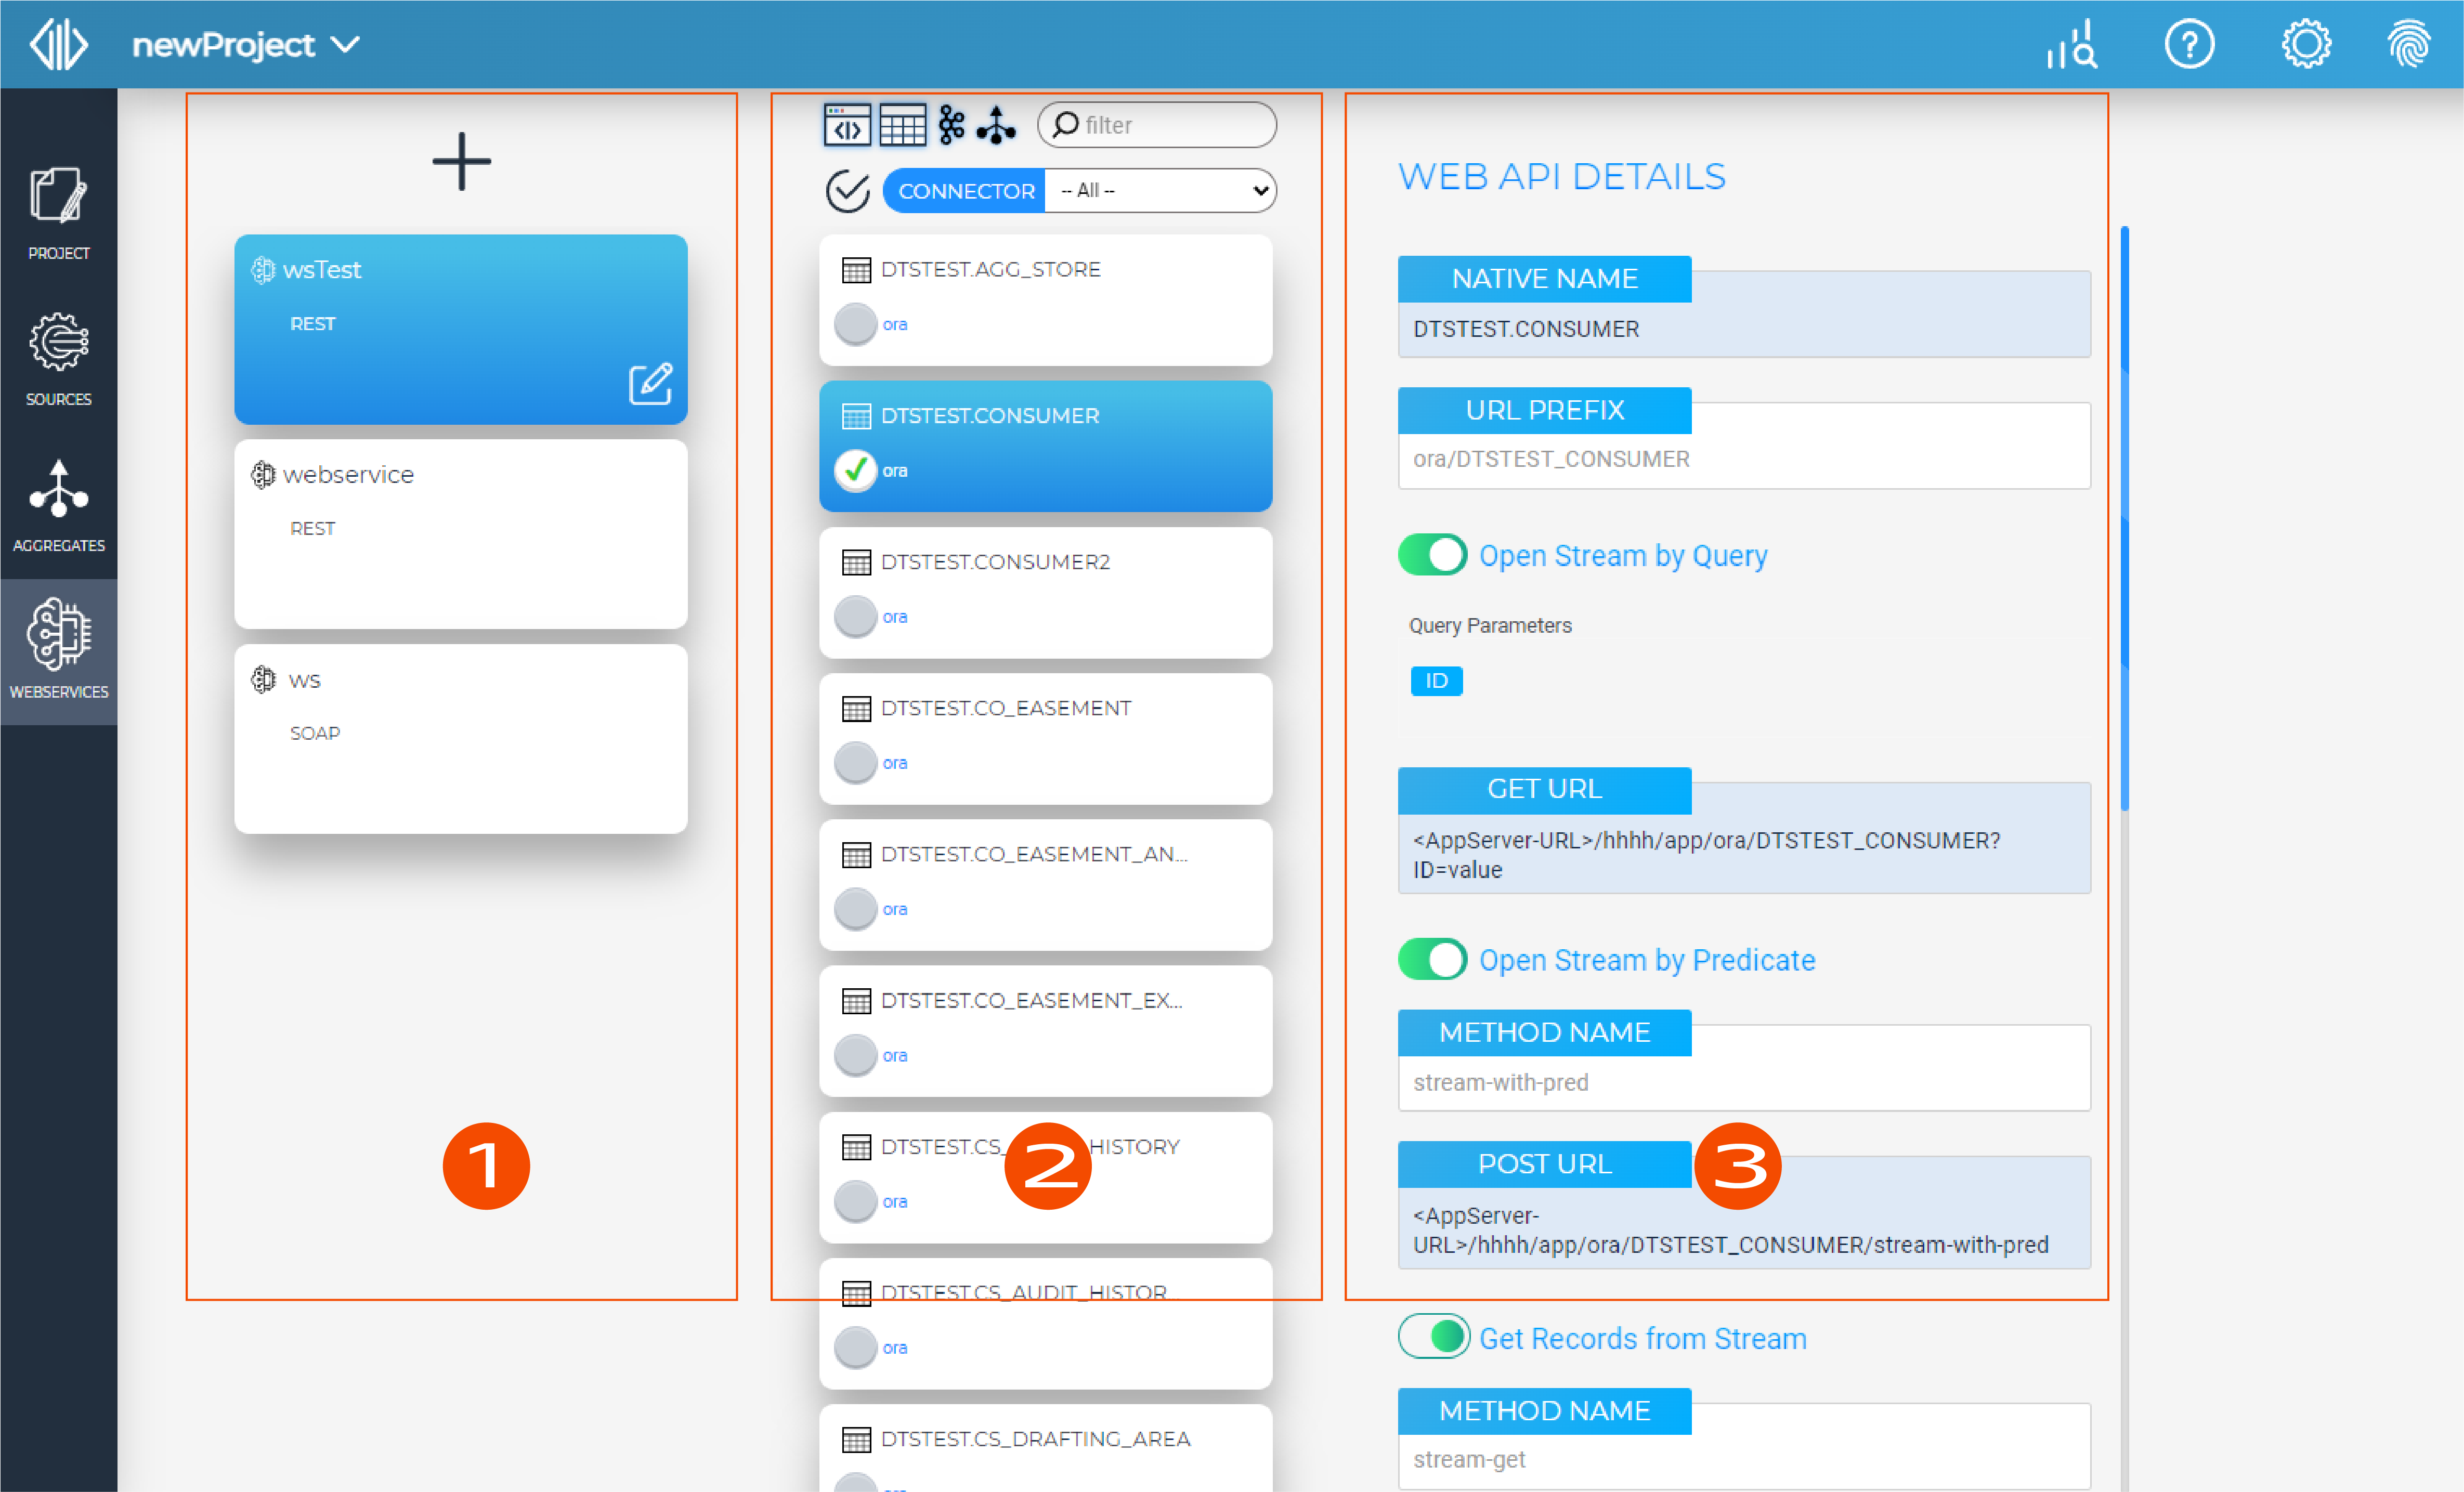 Webservices View